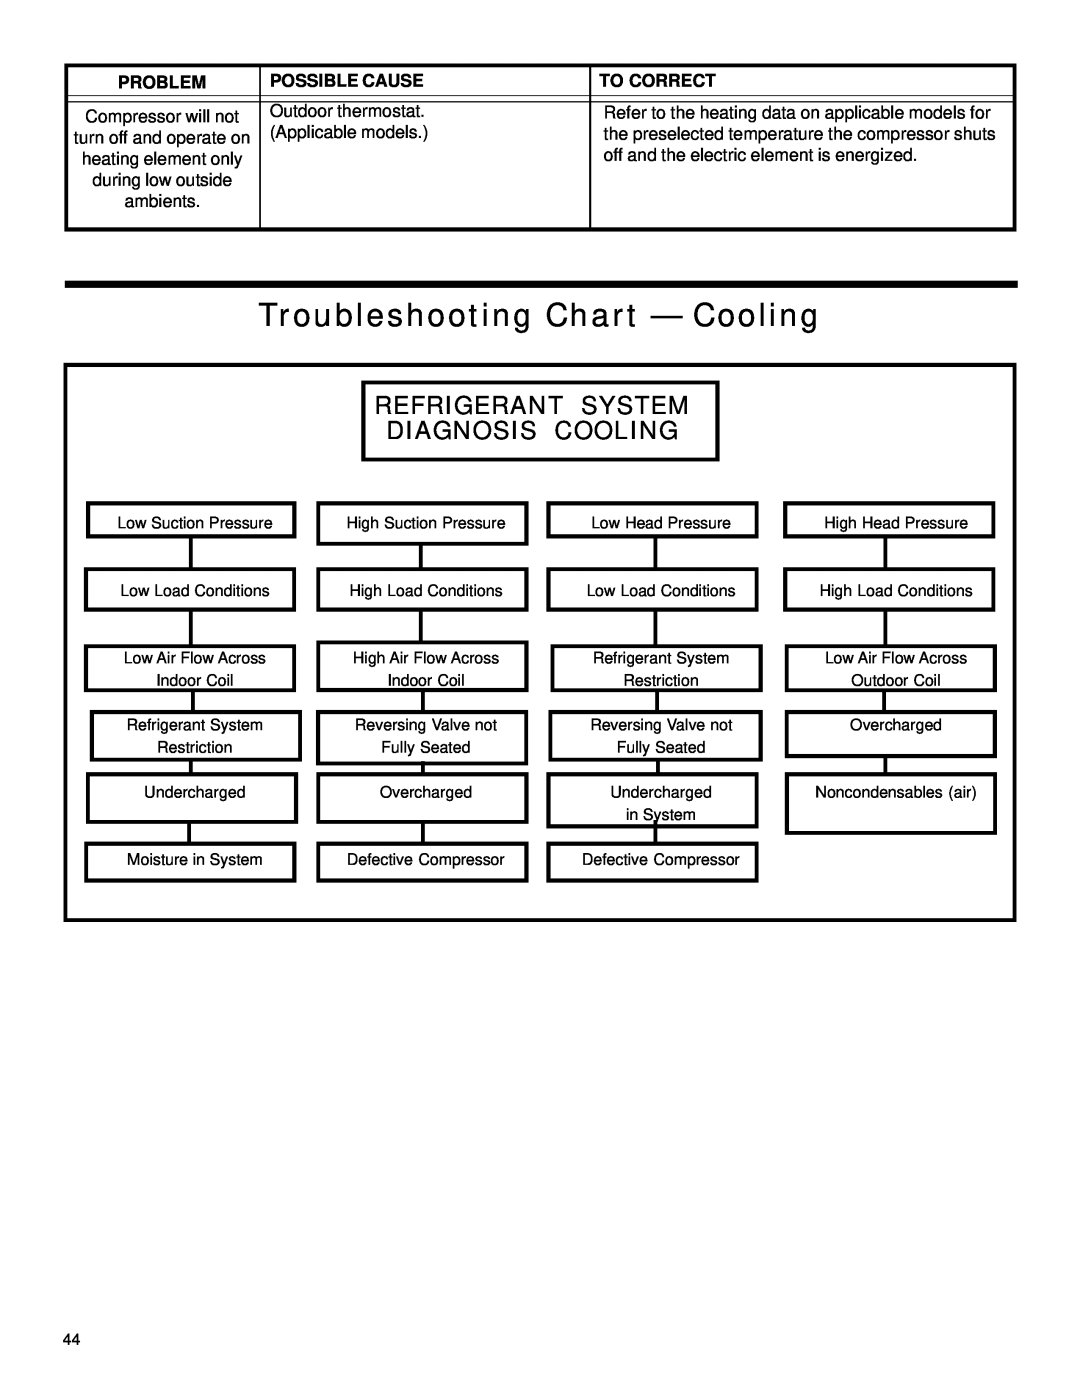 Friedrich 2003 Troubleshooting Chart - Cooling, Refrigerant System Diagnosis Cooling, Problem, Possible Cause, To Correct 